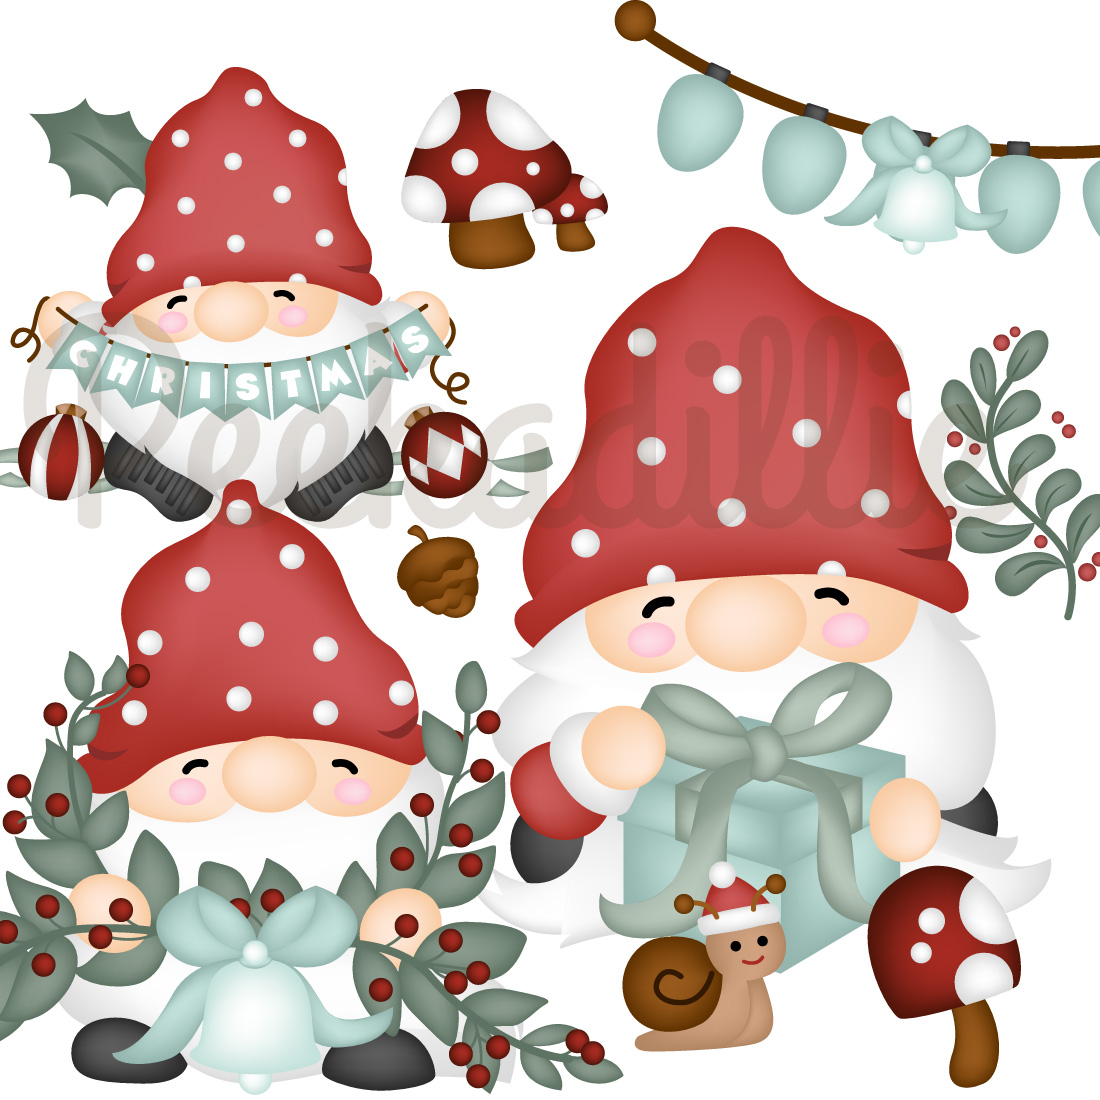 Set of exquisite images of Christmas gnomes.